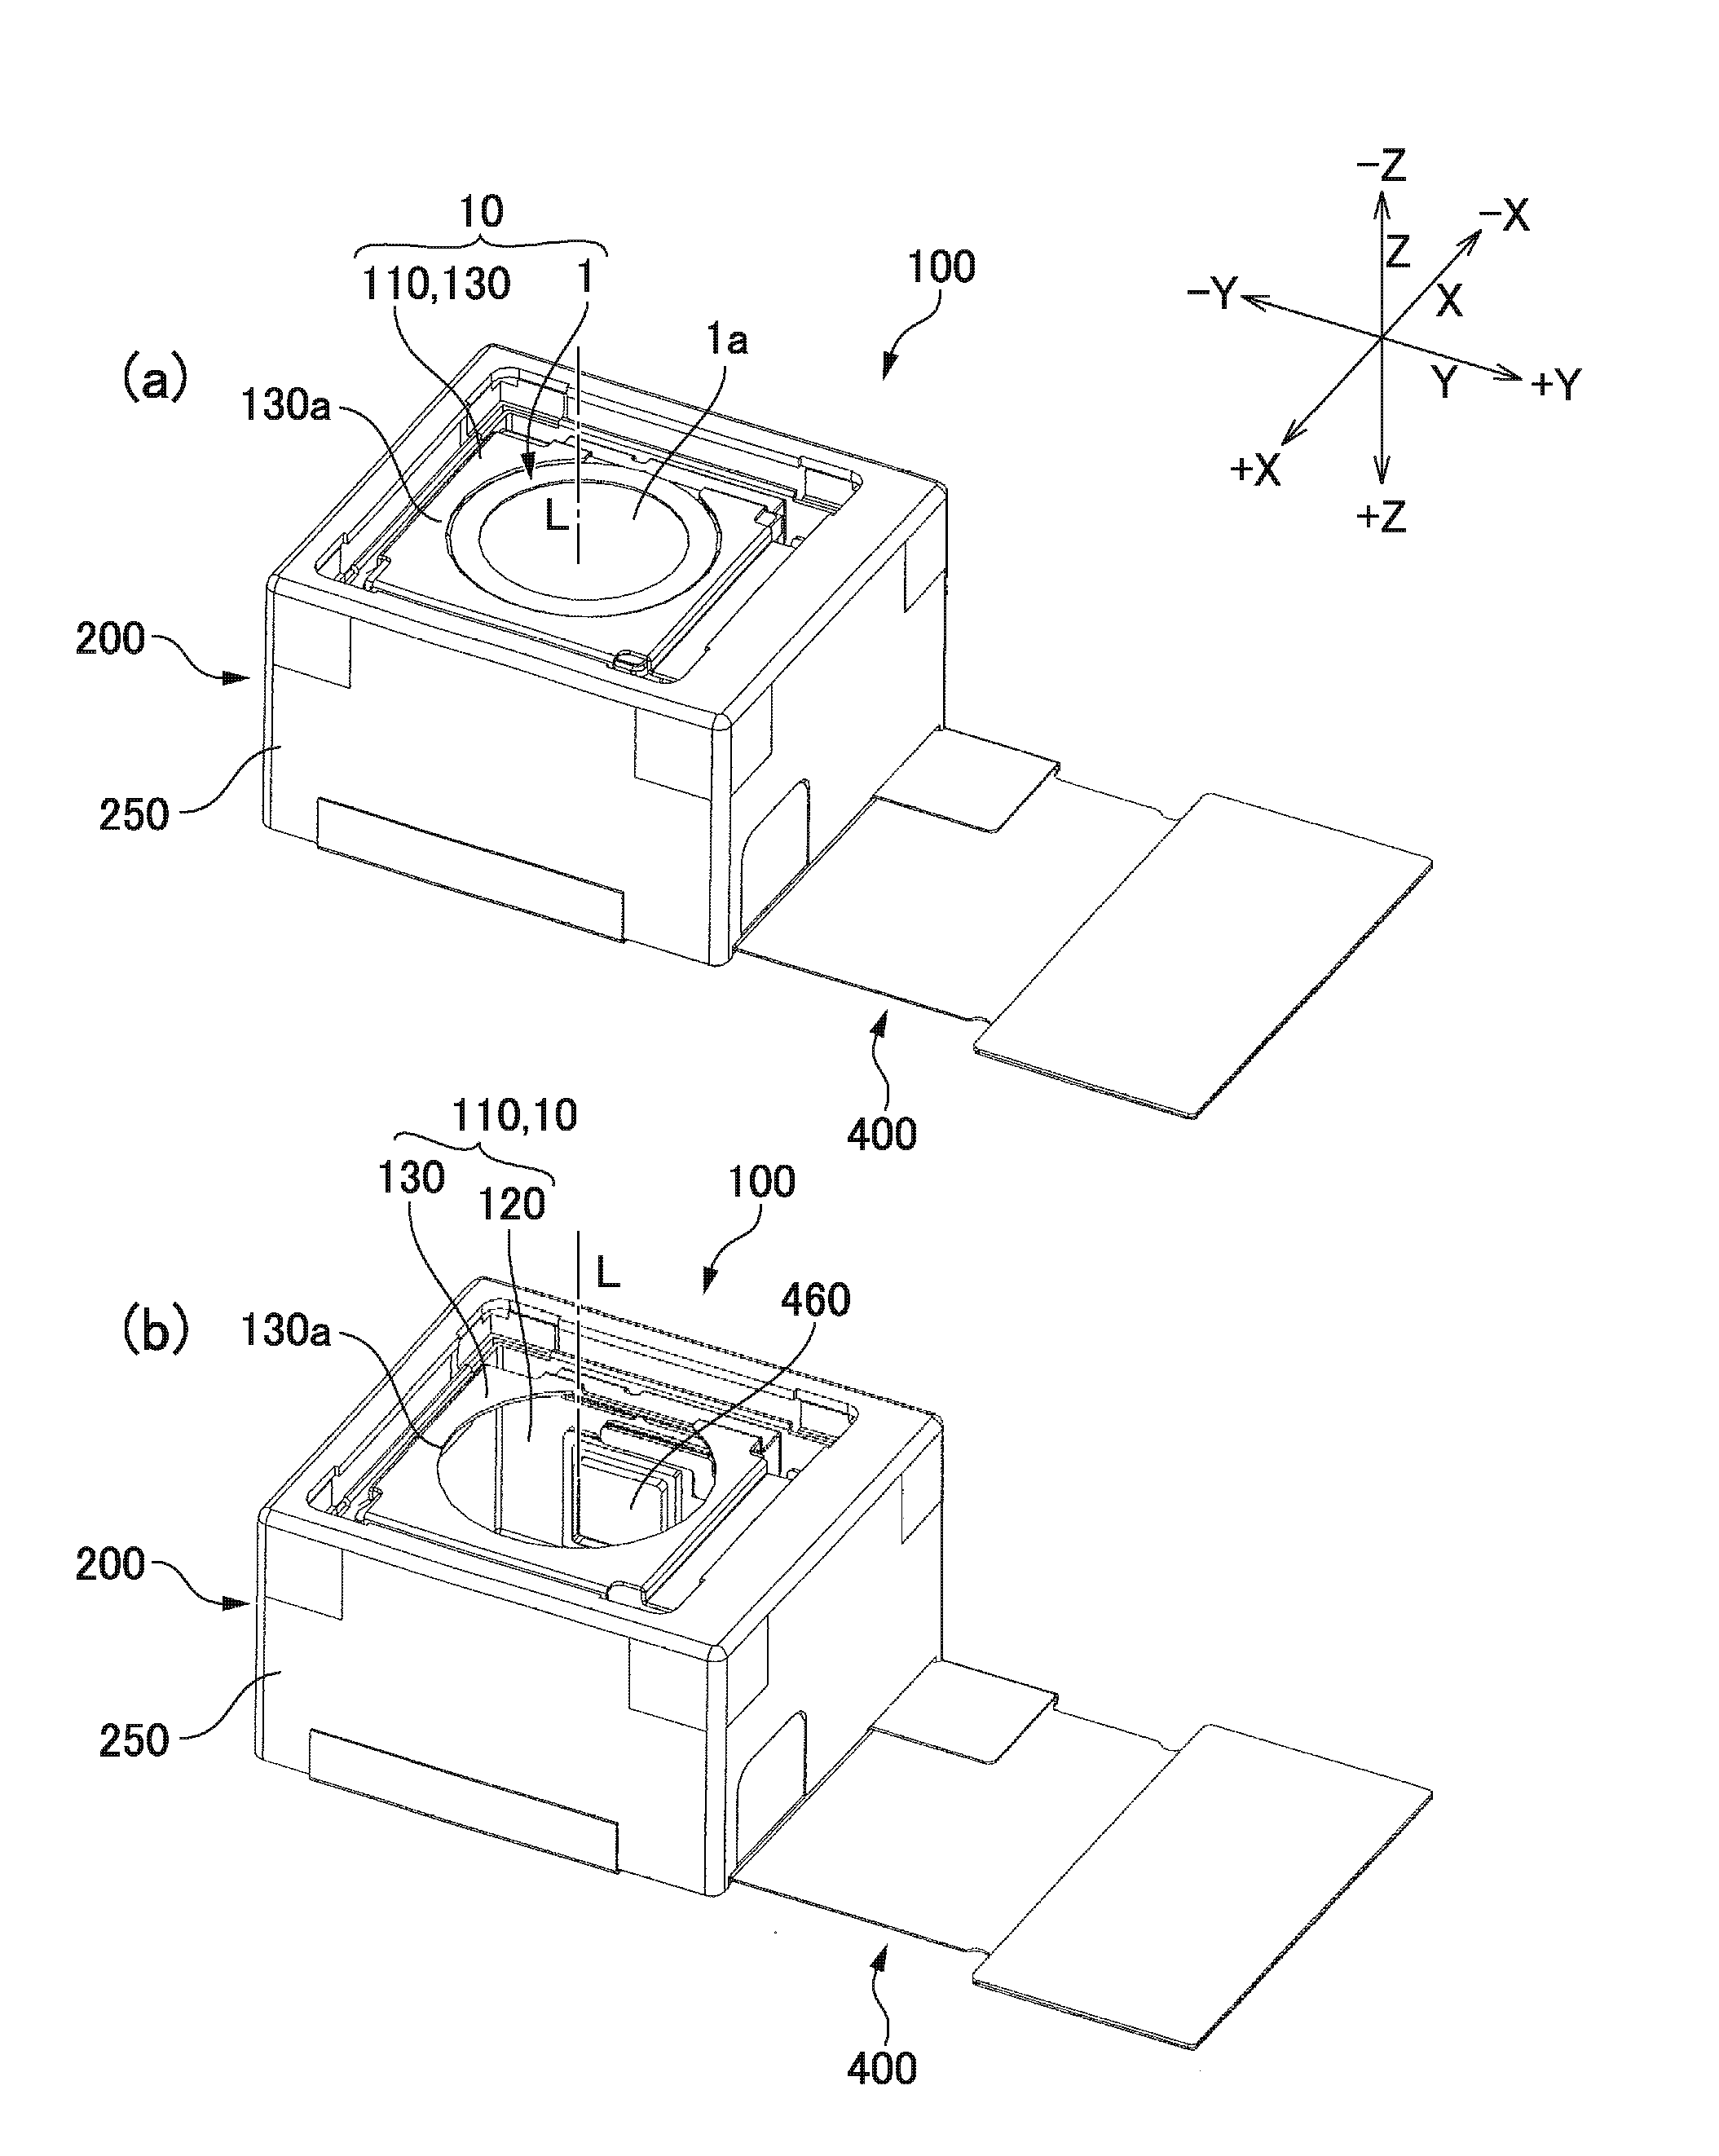 Optical unit with shake compensation function